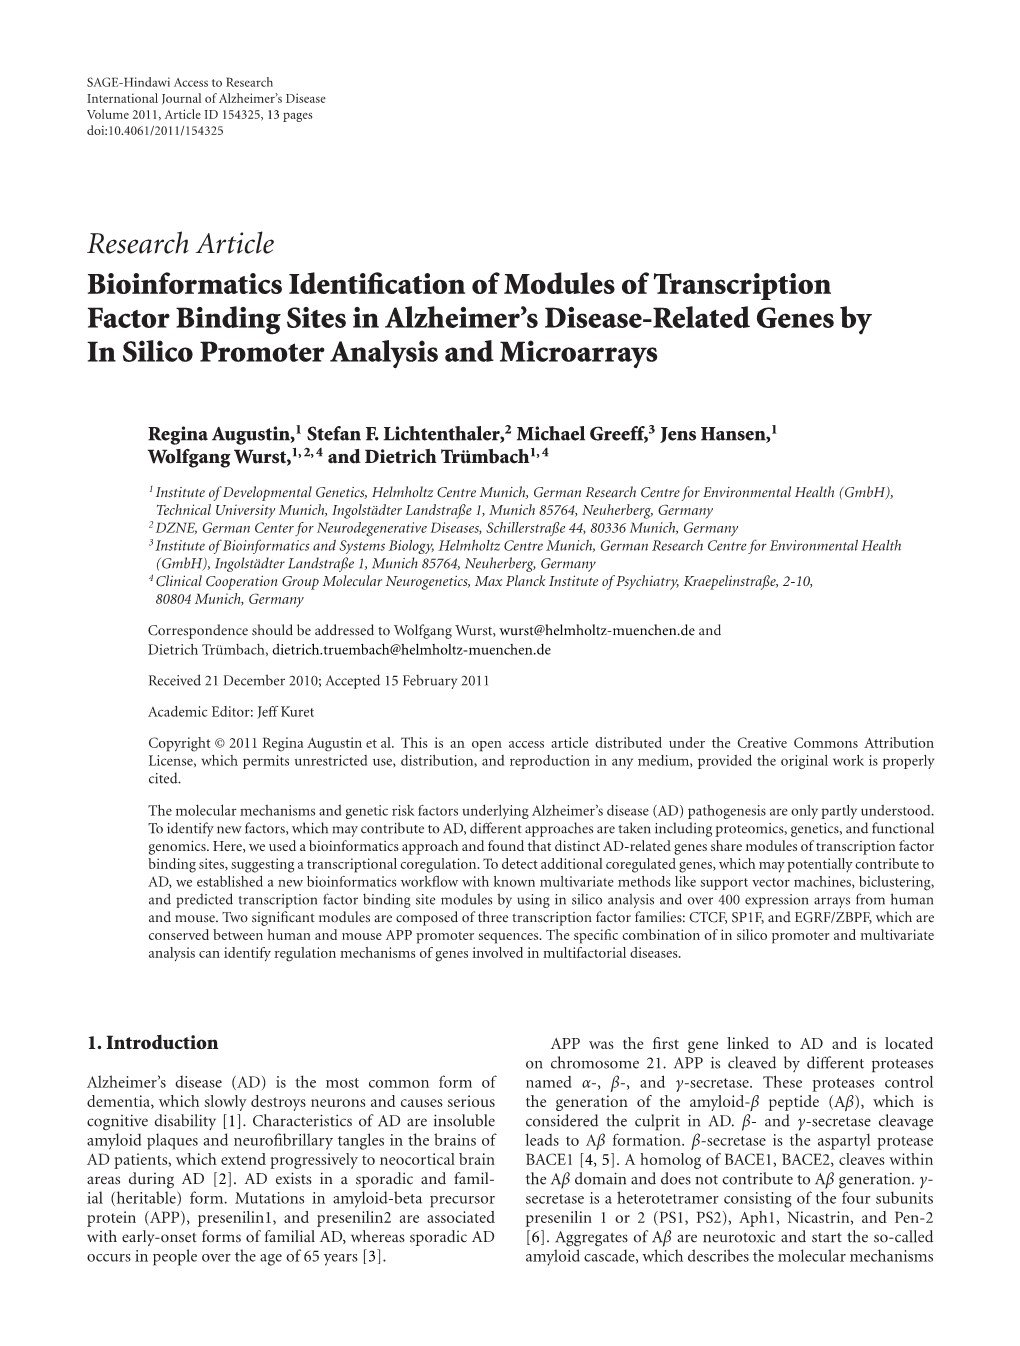 Research Article Bioinformatics Identification of Modules Of